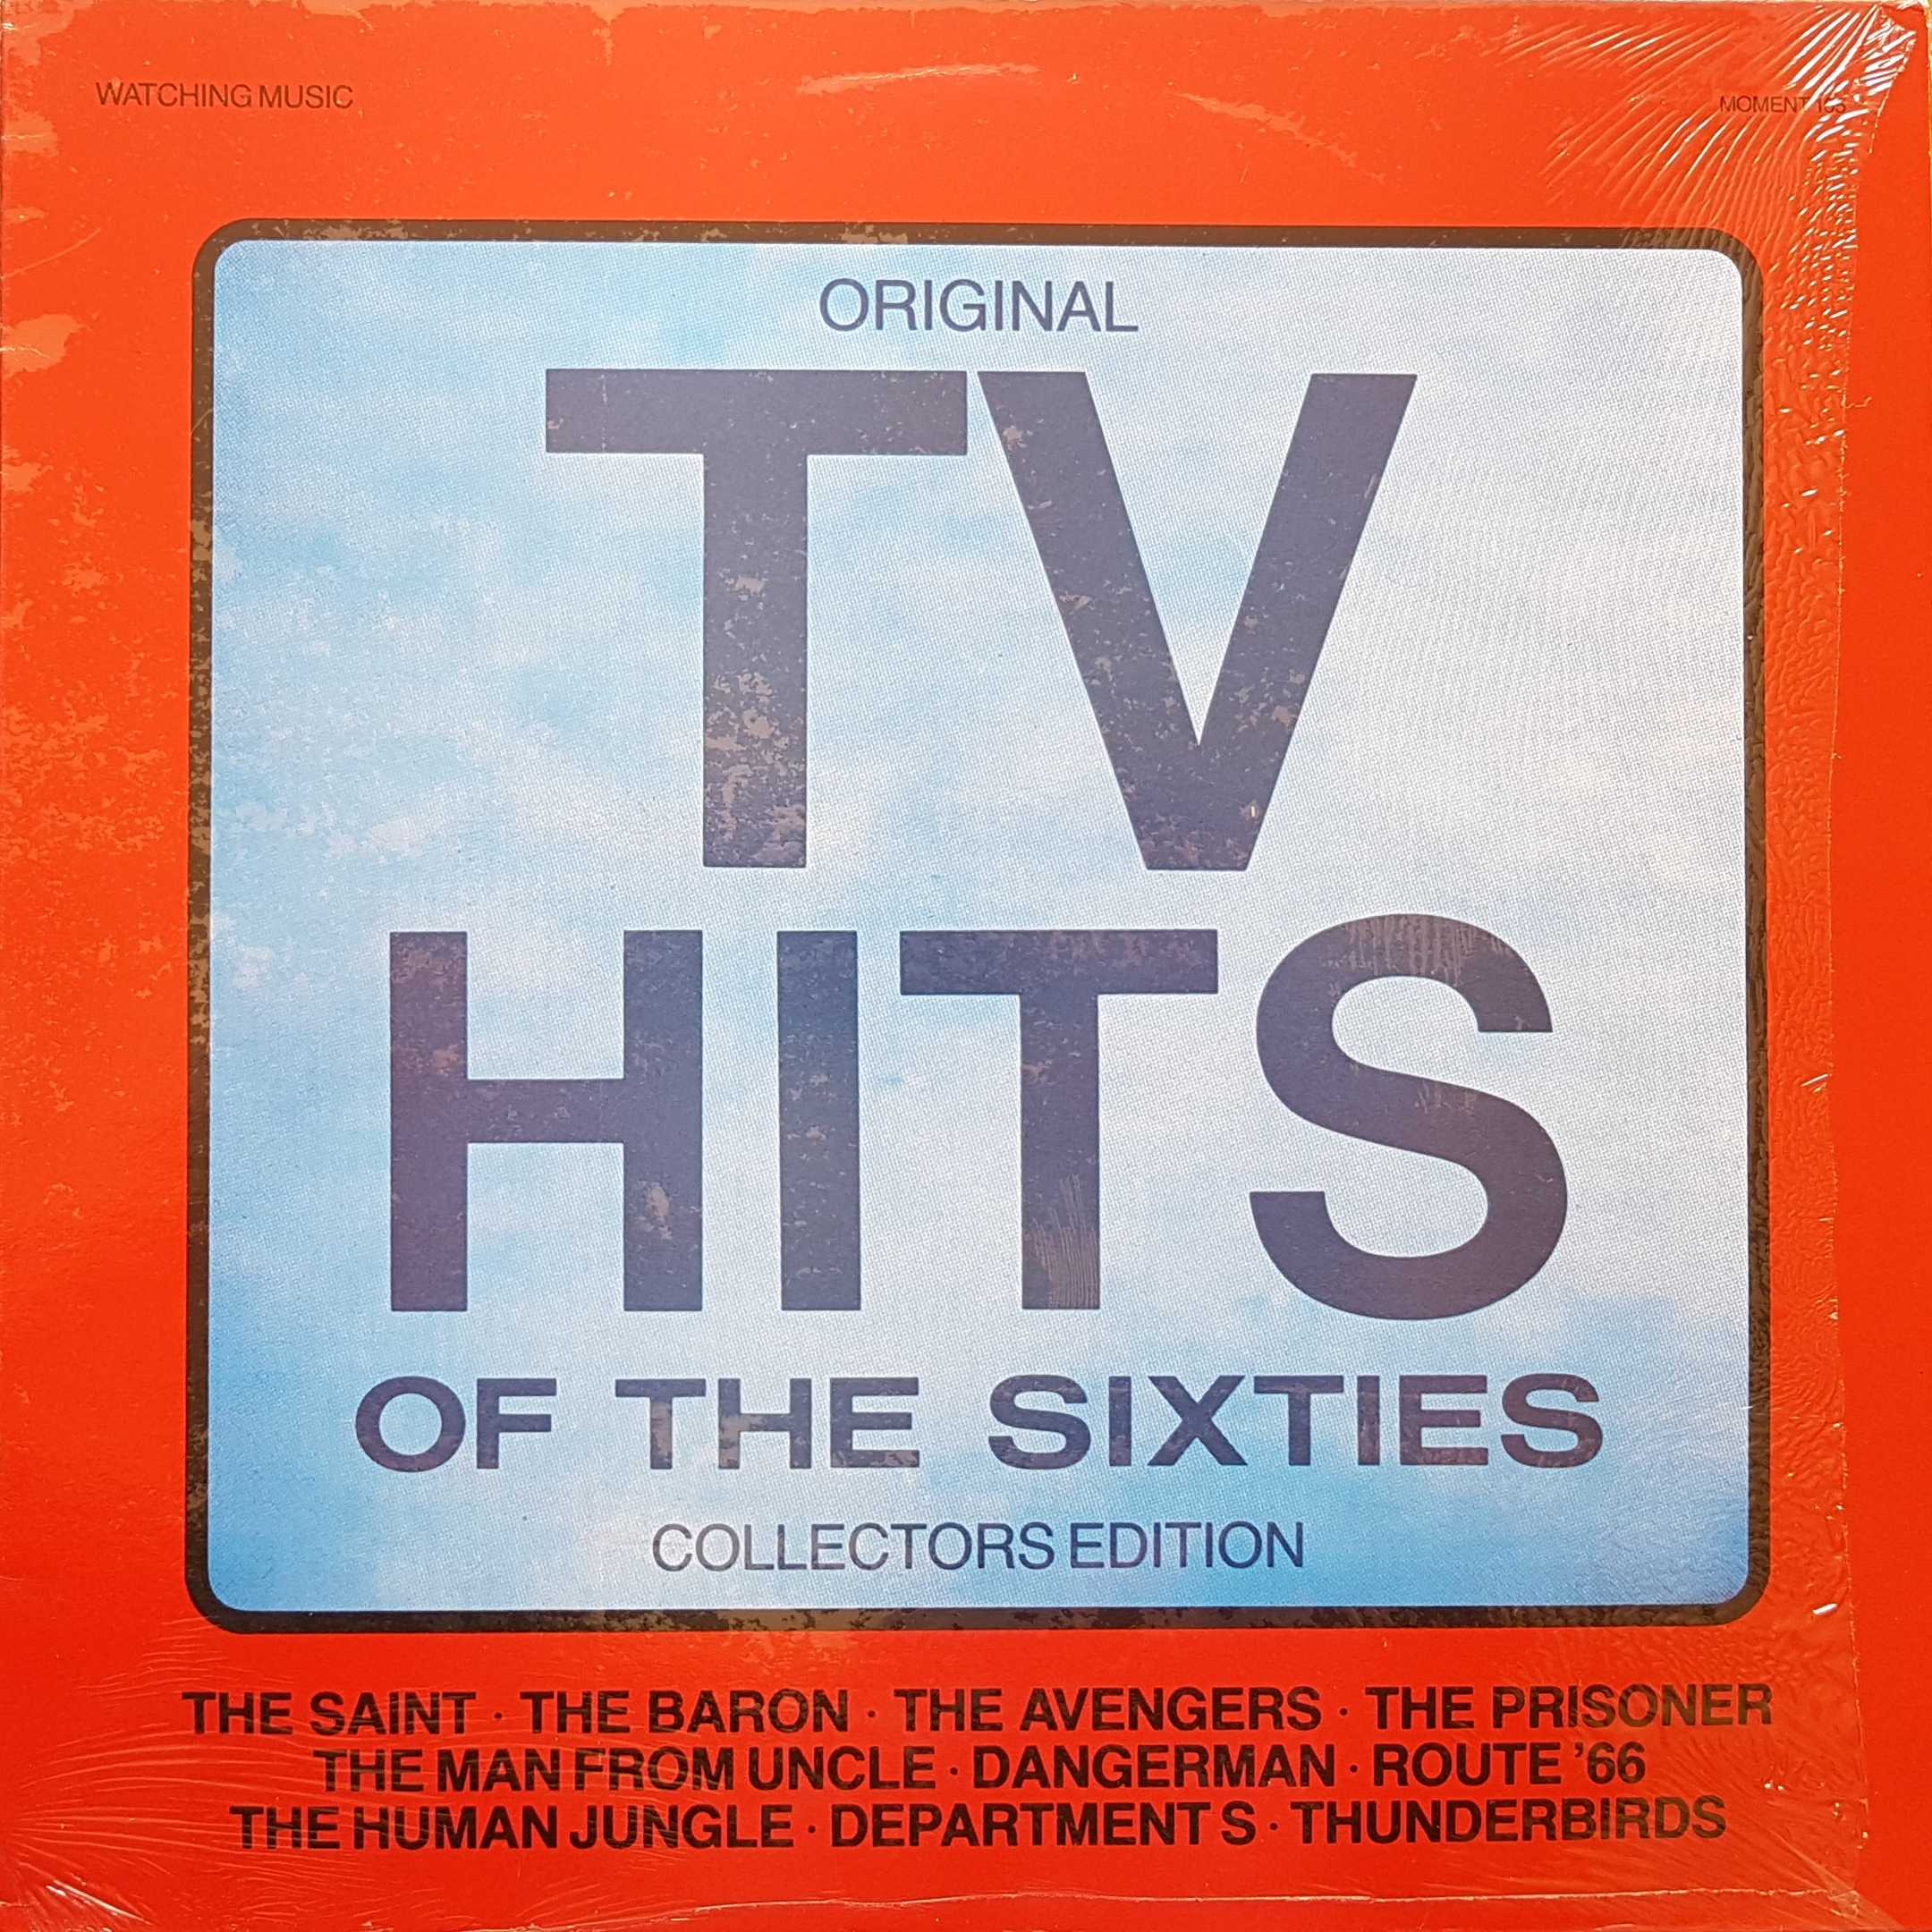 Picture of Original TV hits of the sixties by artist Various from ITV, Channel 4 and Channel 5 albums library